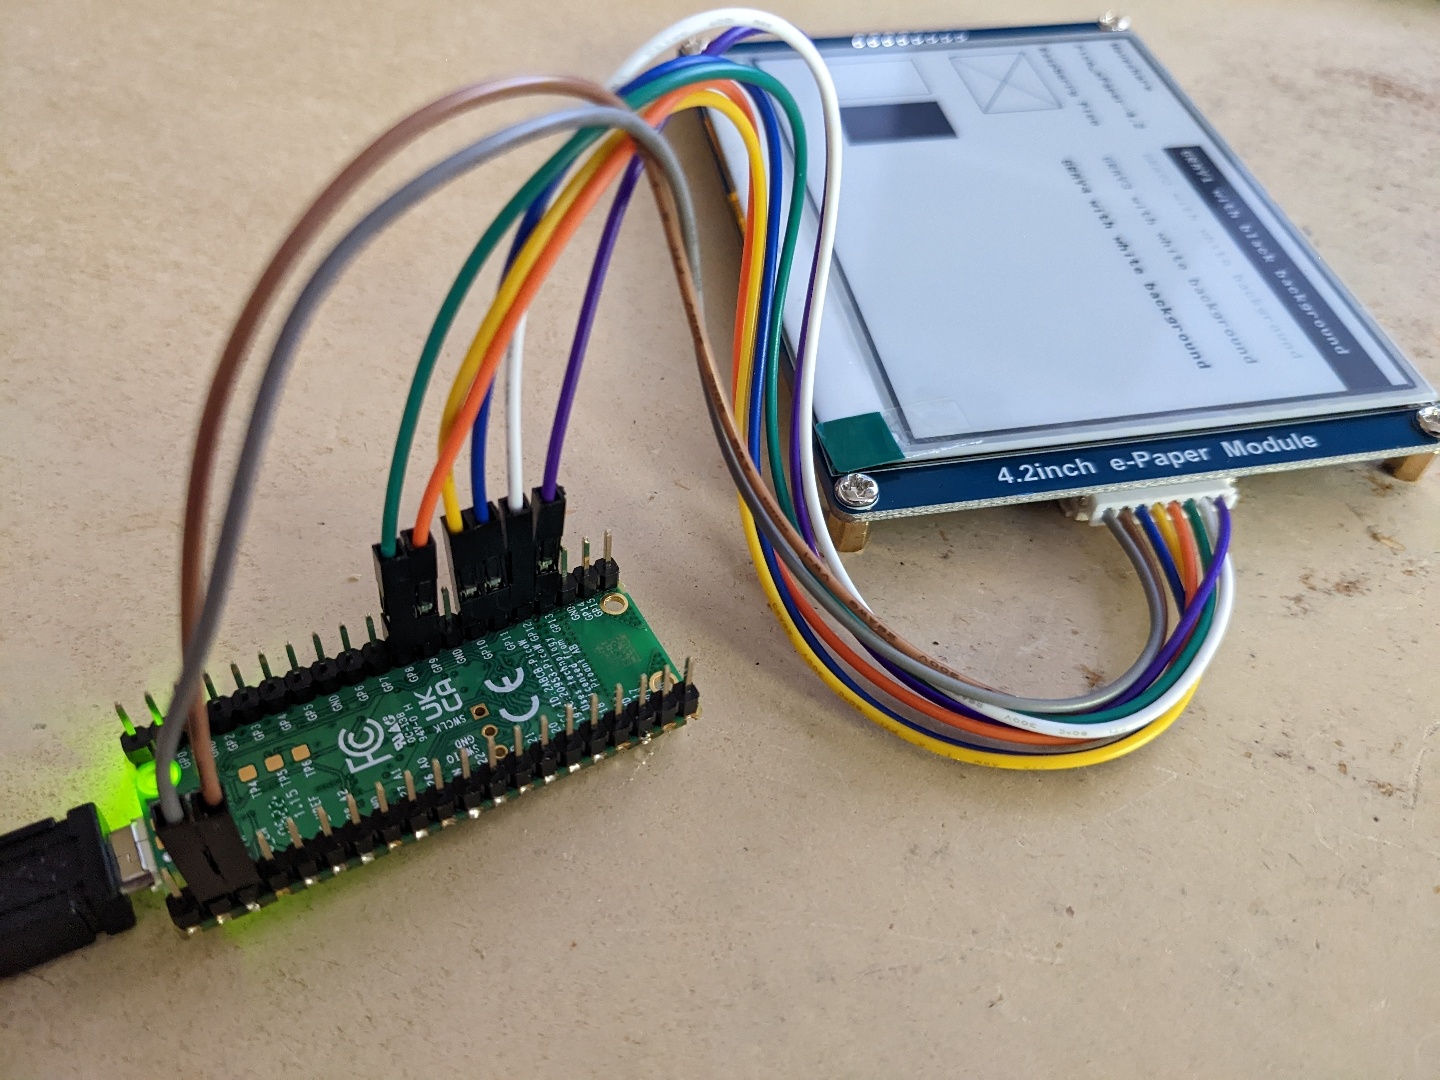 Picture showing PiPicoW upside down with coloured wiring going from pins listed in table to a 4.2 Inch e-Paper module, itself showing the results of the WaveShare demo Python script onscreen